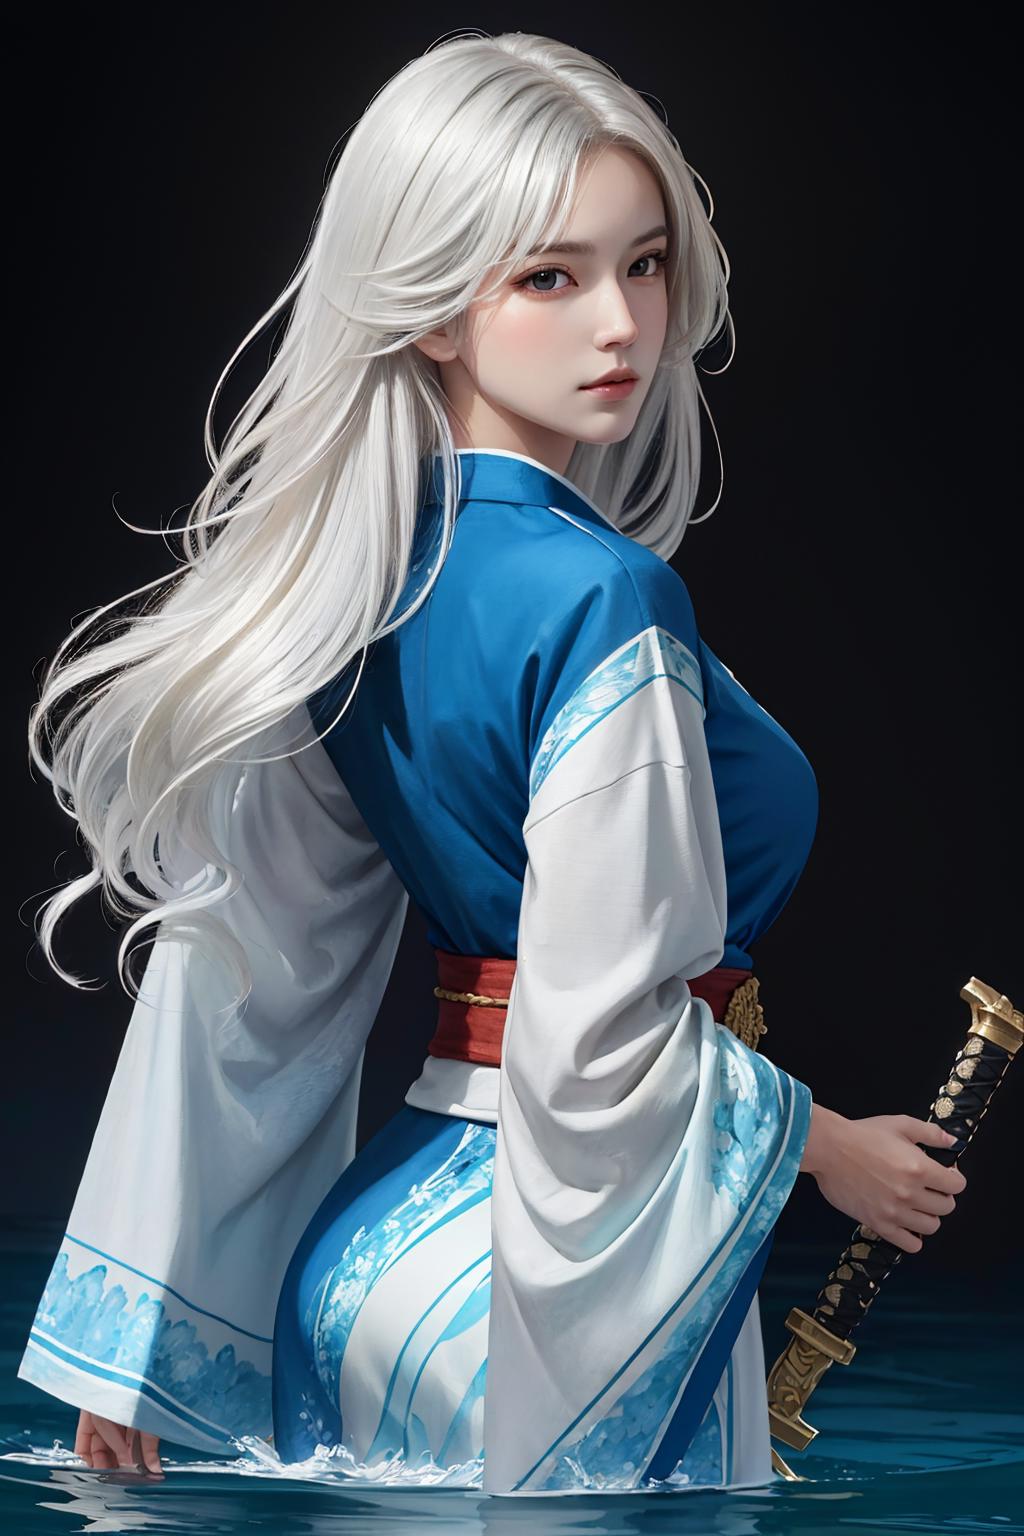 Anime girl with long white hair wearing a blue kimono and holding a sword.